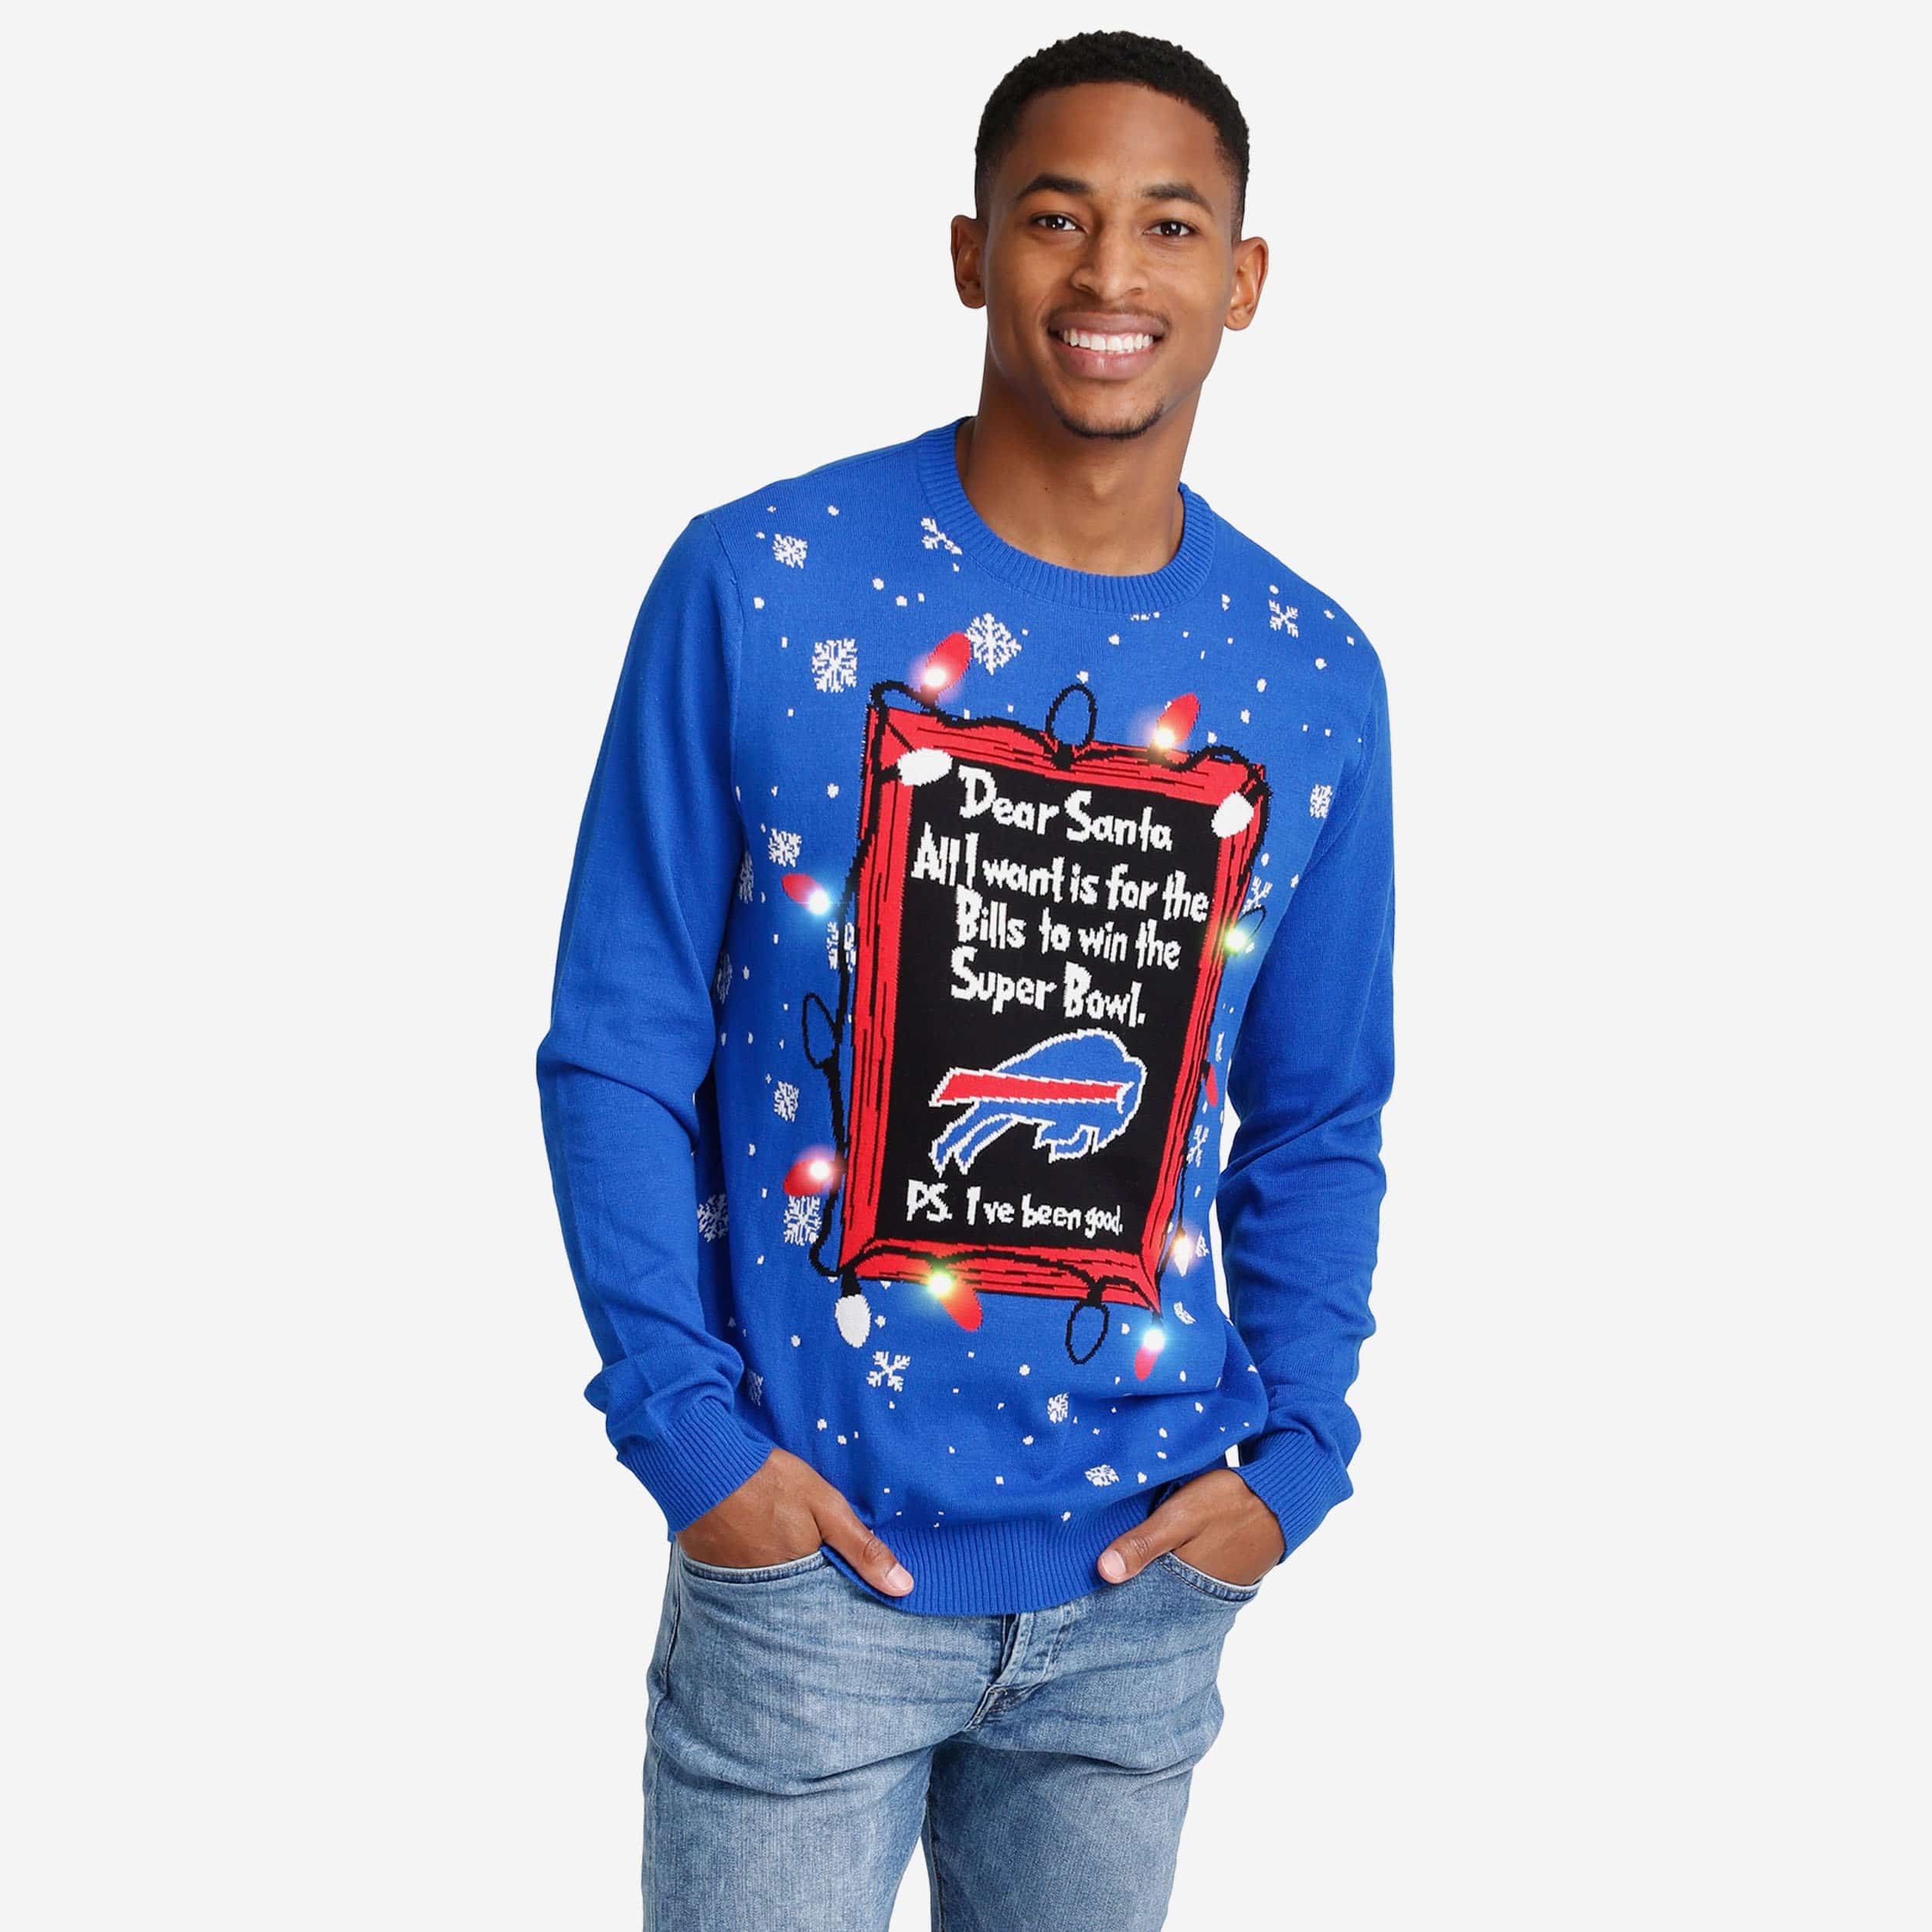 Edmonton Oilers Ltd Edition Christmas Sweater With Autographed